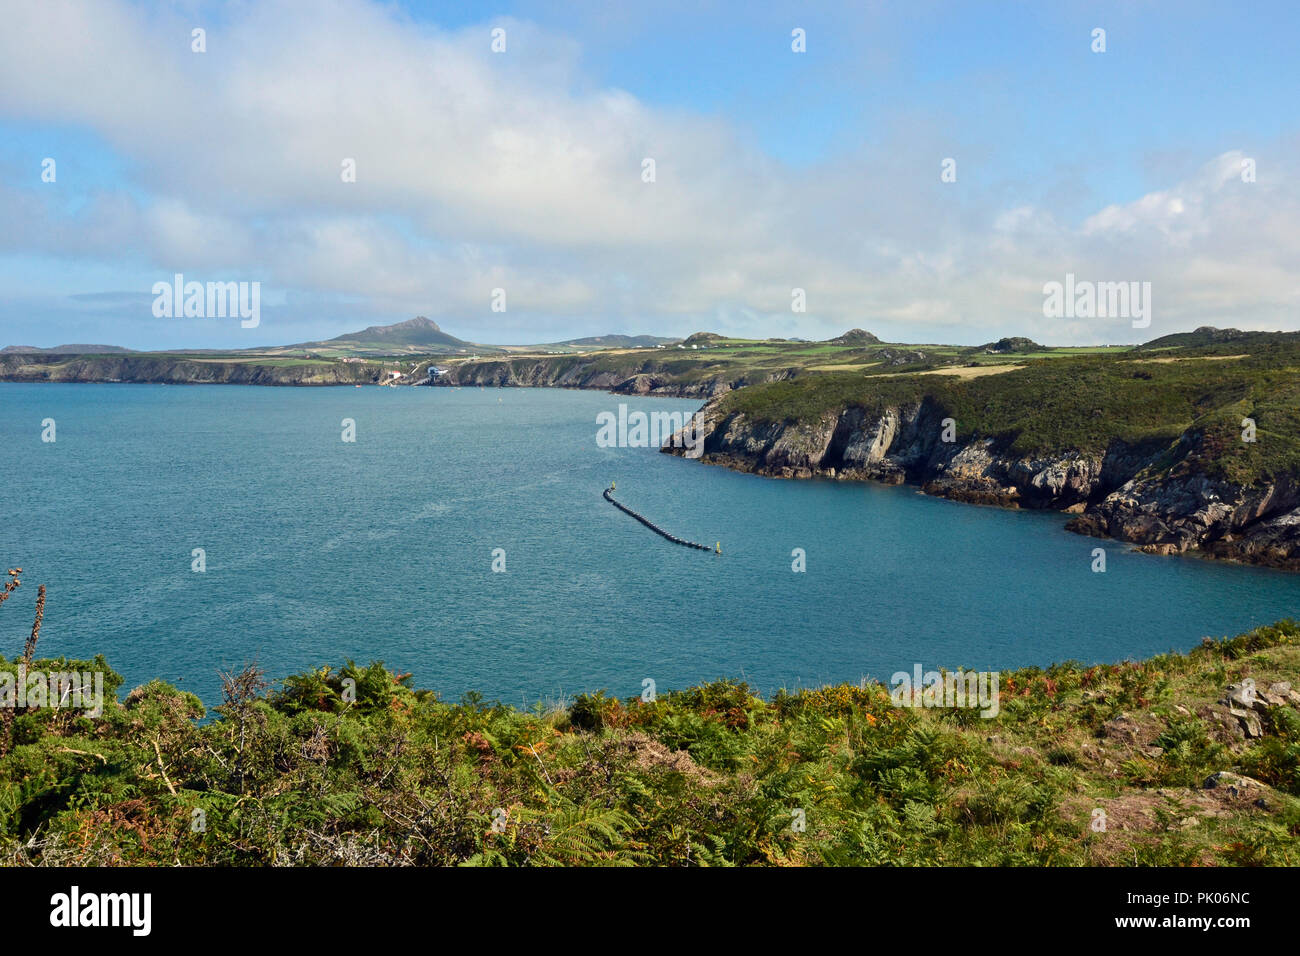 Deltastream tidal energy project, from the Pembrokeshire Coast Path, St Justinians, St Davids, Pembrokeshire, Wales, UK Stock Photo